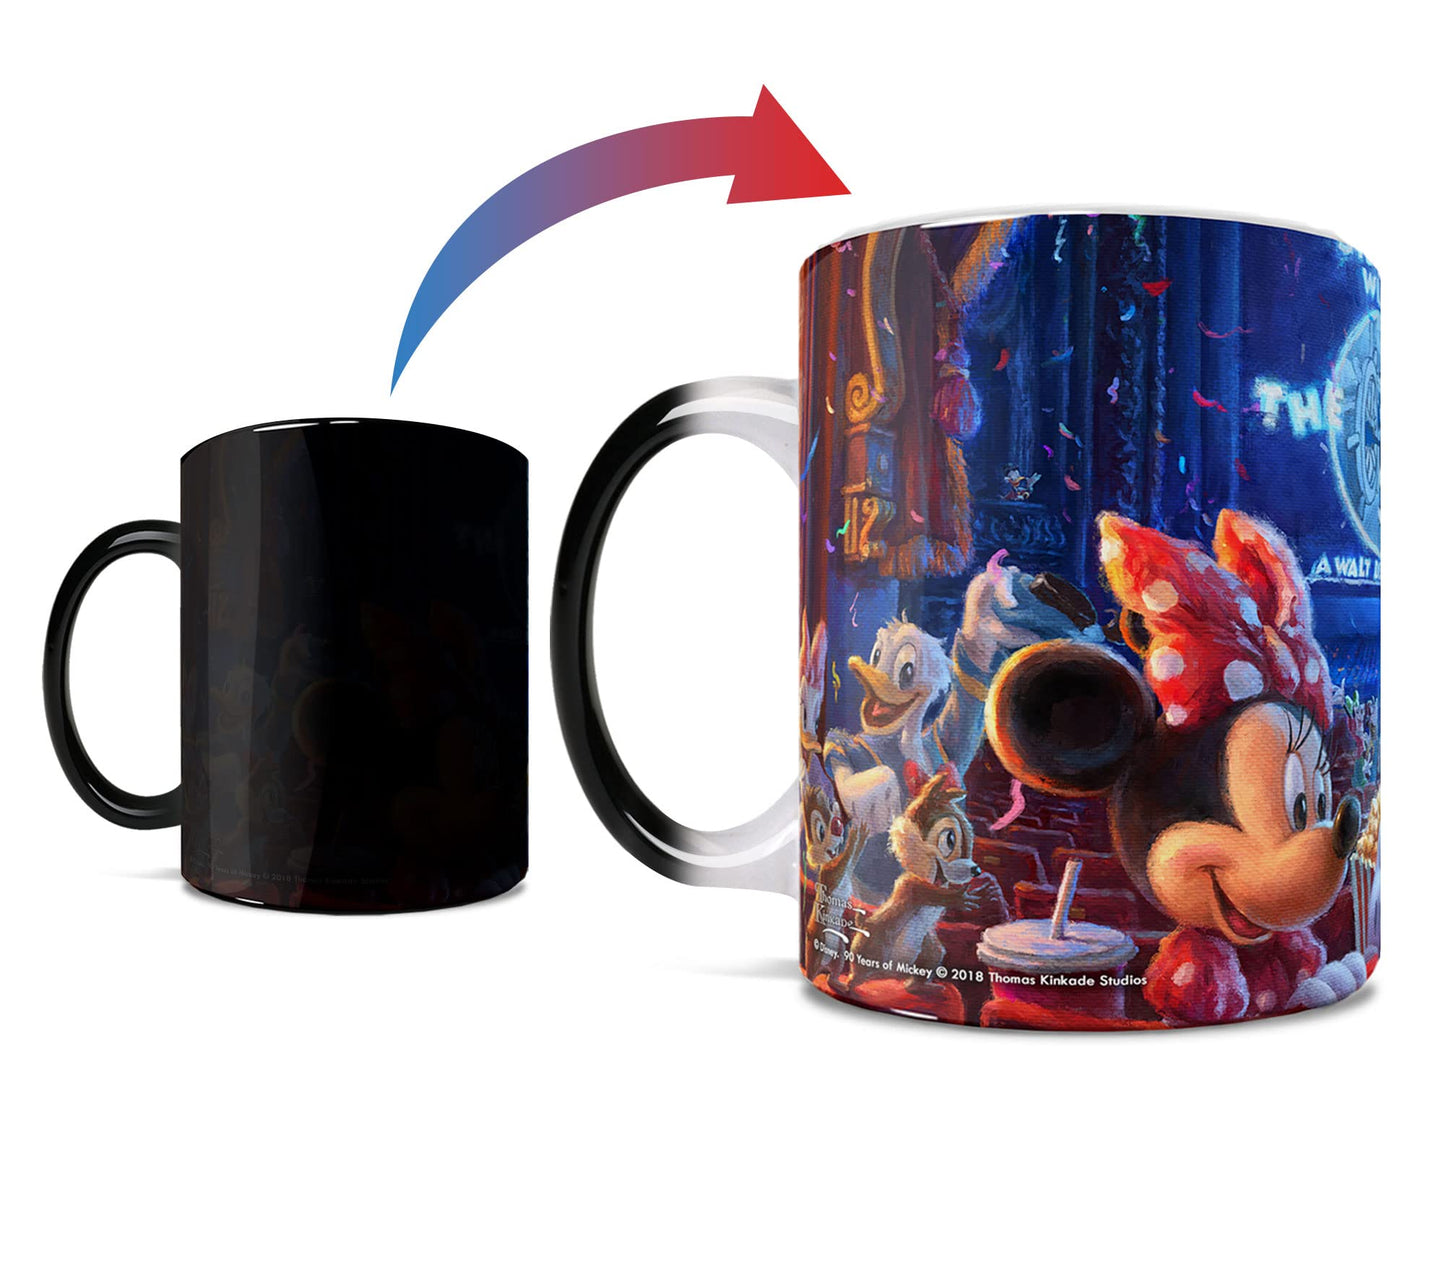 Disney – Mickey and Minnie Mouse - 90th Anniversary - Thomas Kinkade - One 11 oz Morphing Mugs Color Changing Heat Sensitive Ceramic Mug – Image Revealed When HOT Liquid Is Added!